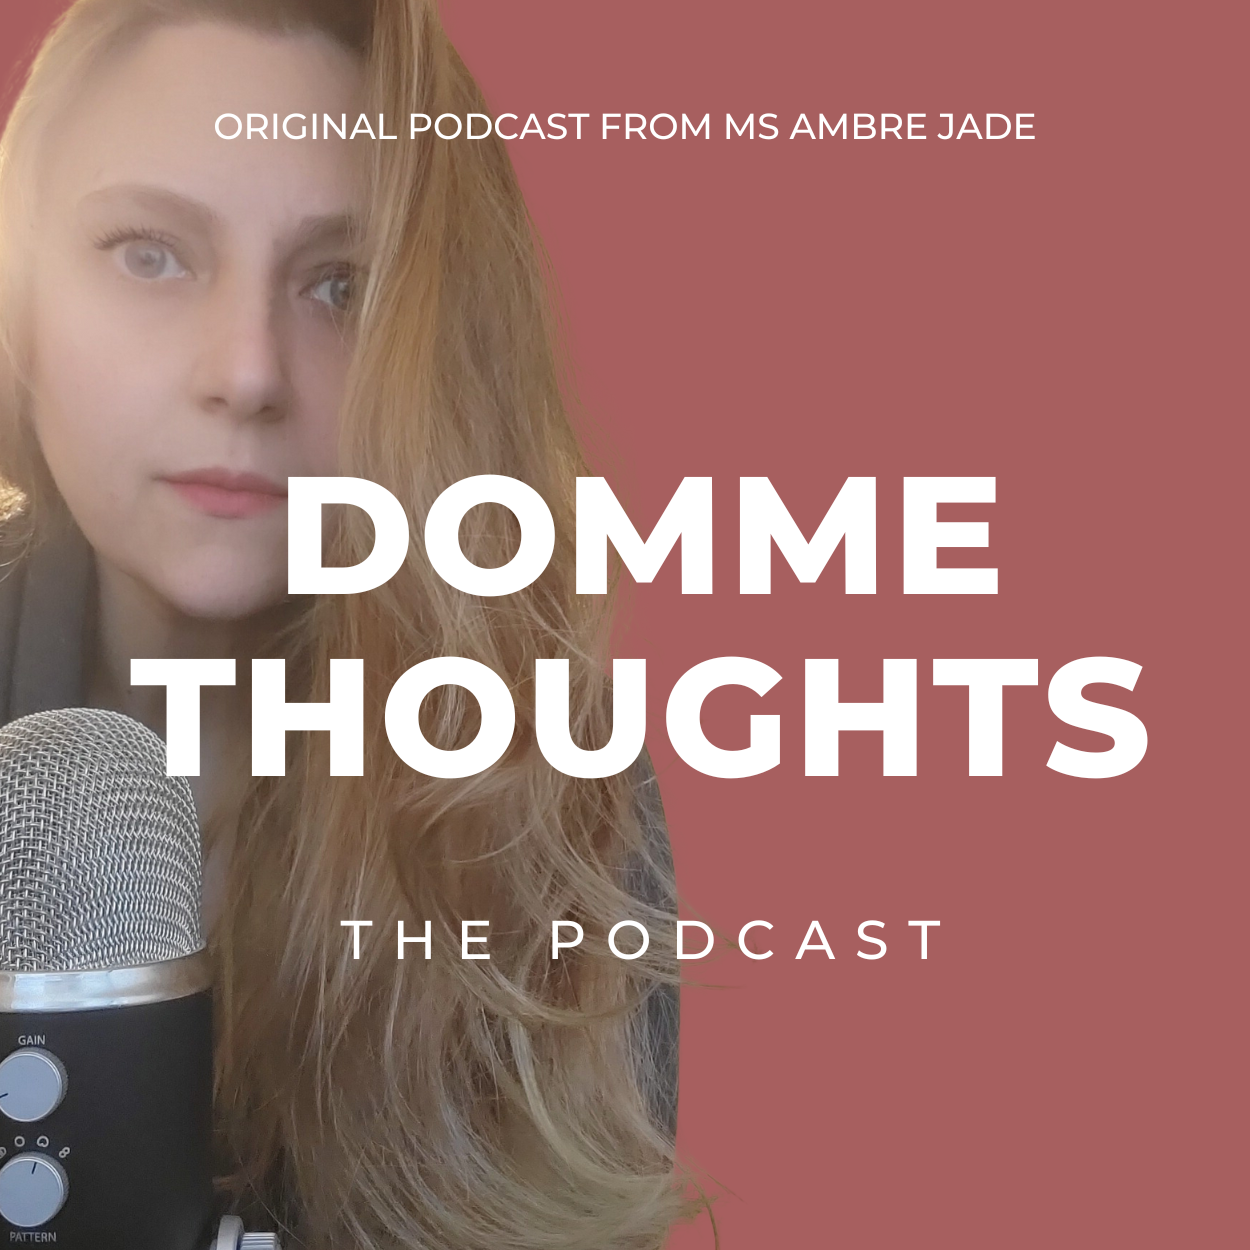 Ambre Jade's podcast, Domme Thoughts